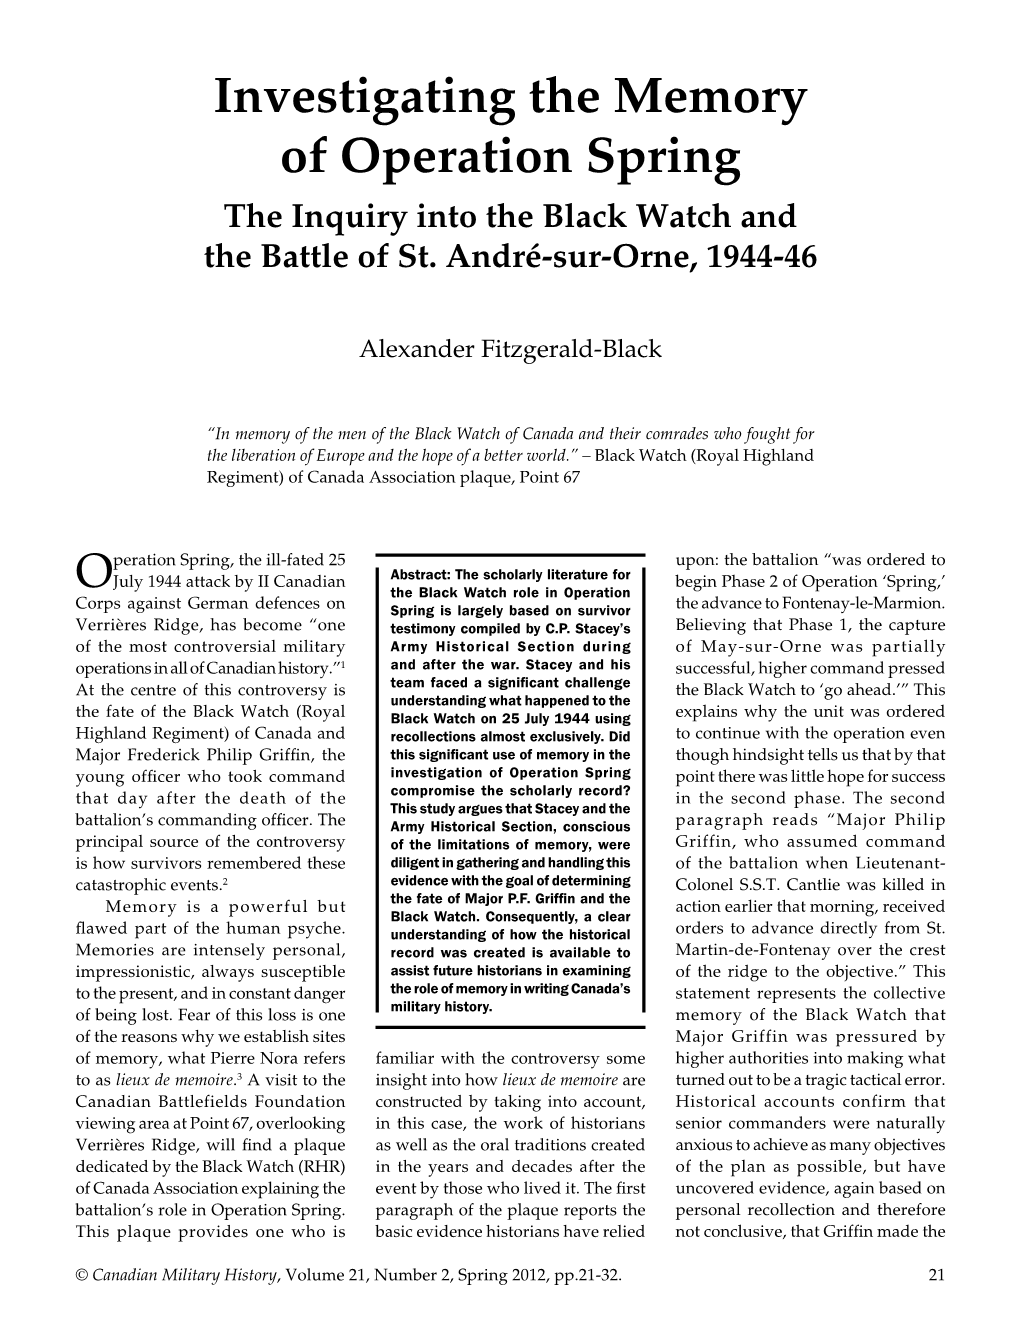 Investigating the Memory of Operation Spring the Inquiry Into the Black Watch and the Battle of St